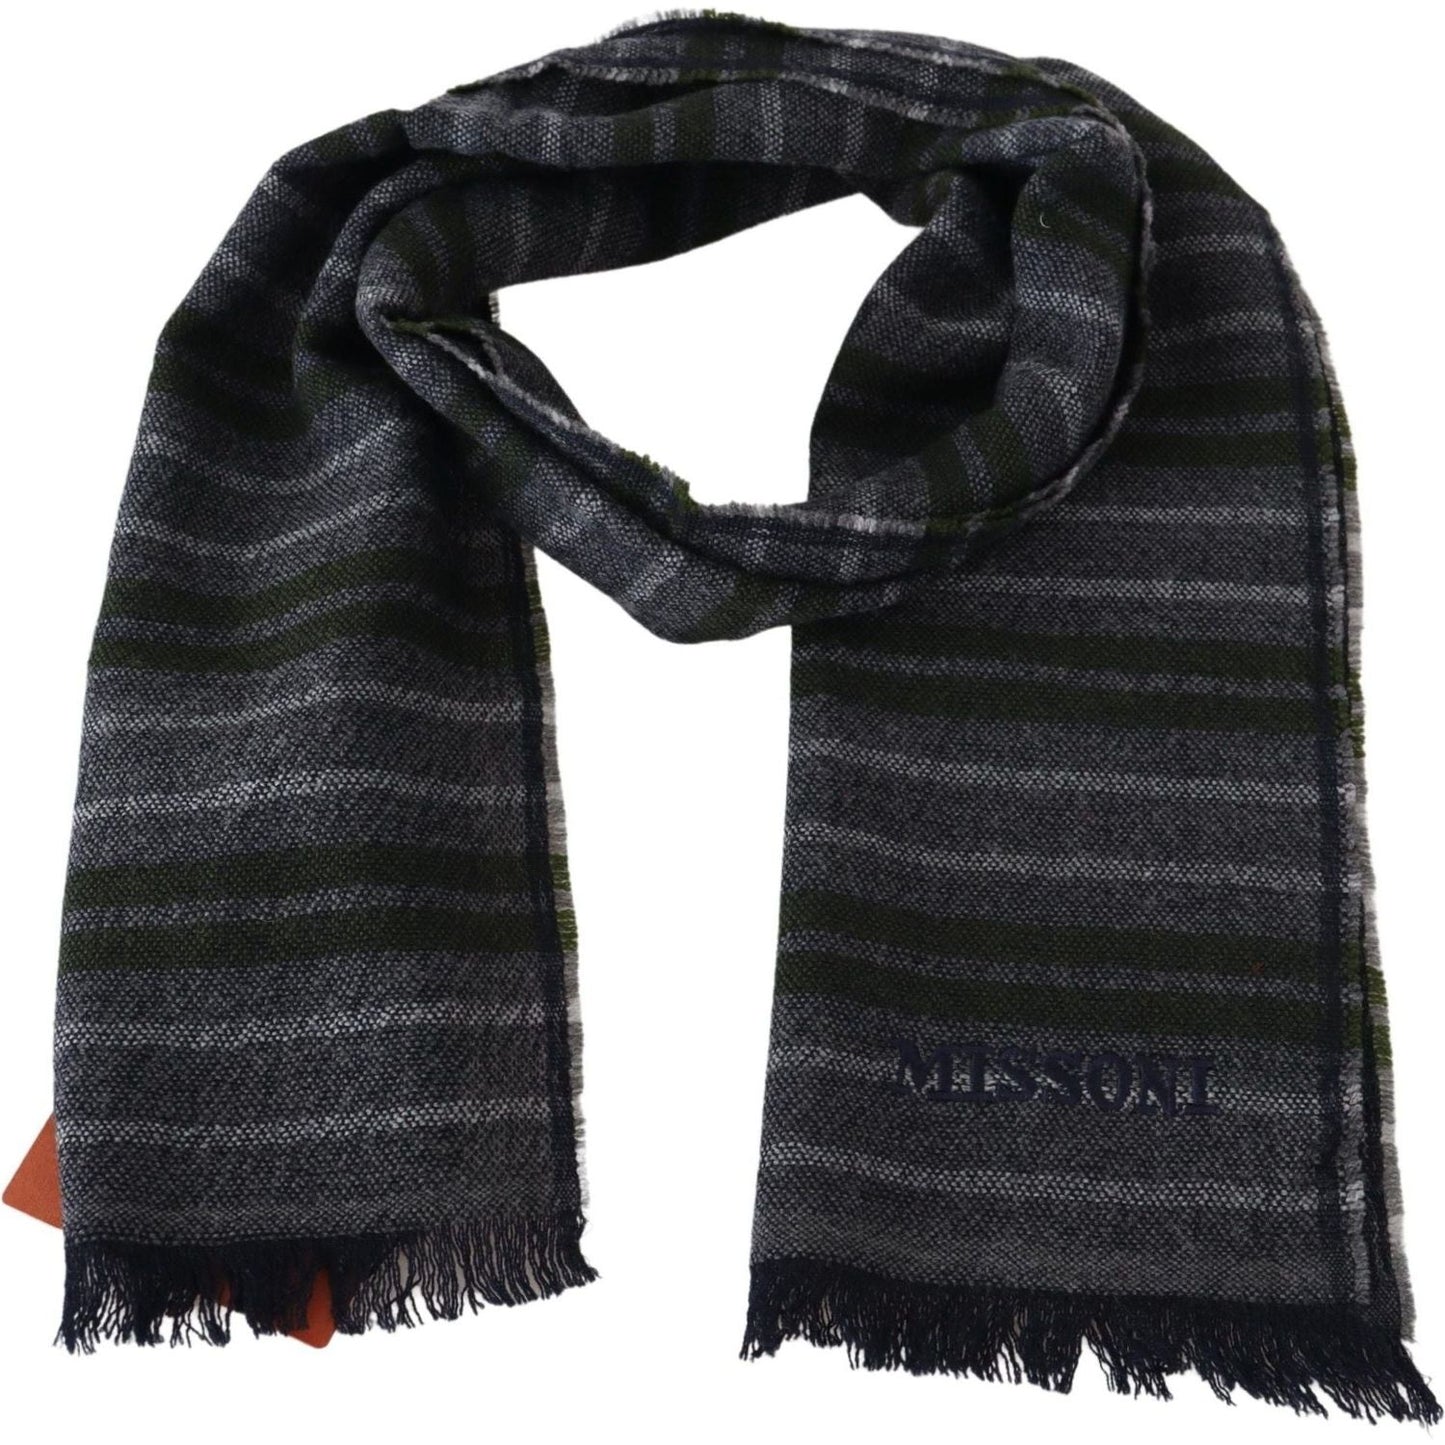 Chic Striped Wool Scarf with Logo Embroidery Missoni